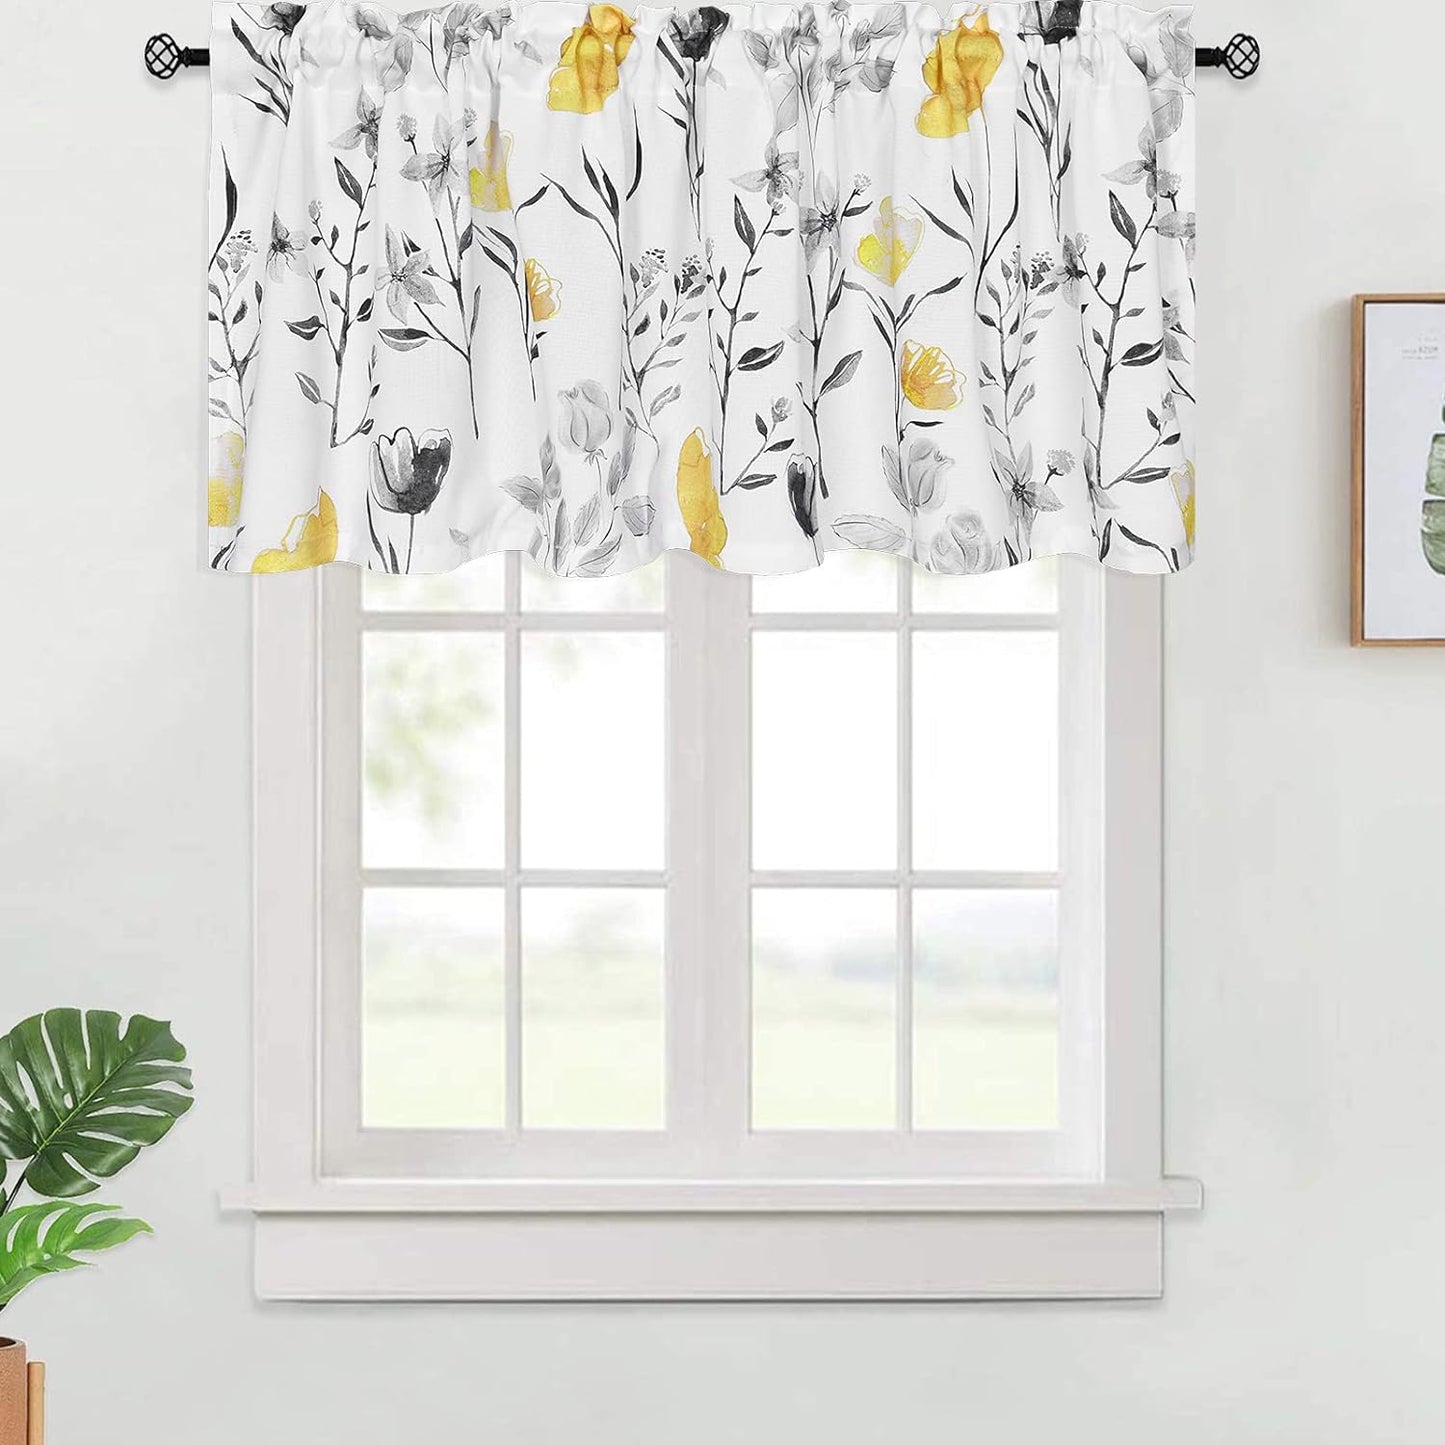 Likiyol Floral Kithchen Curtains 36 Inch Watercolor Flower Leaves Tier Curtains, Yellow and Gray Floral Cafe Curtains, Rod Pocket Small Window Curtain for Cafe Bathroom Bedroom Drapes  Likiyol Yellow 18"L X 52"W 